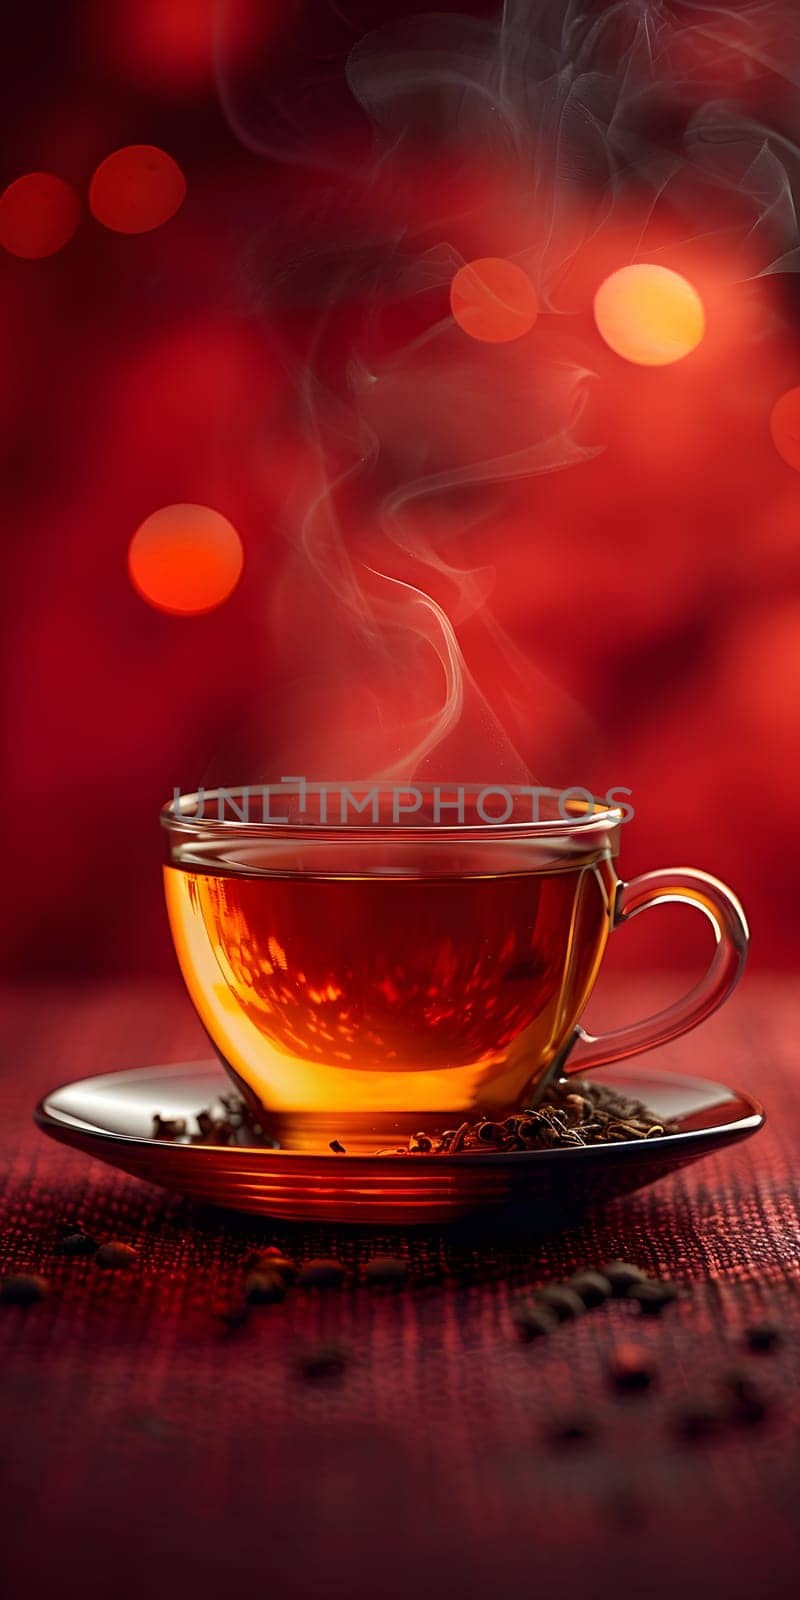 A coffee cup with steam rising from it sits on an orange saucer on a table, creating a cozy and inviting atmosphere